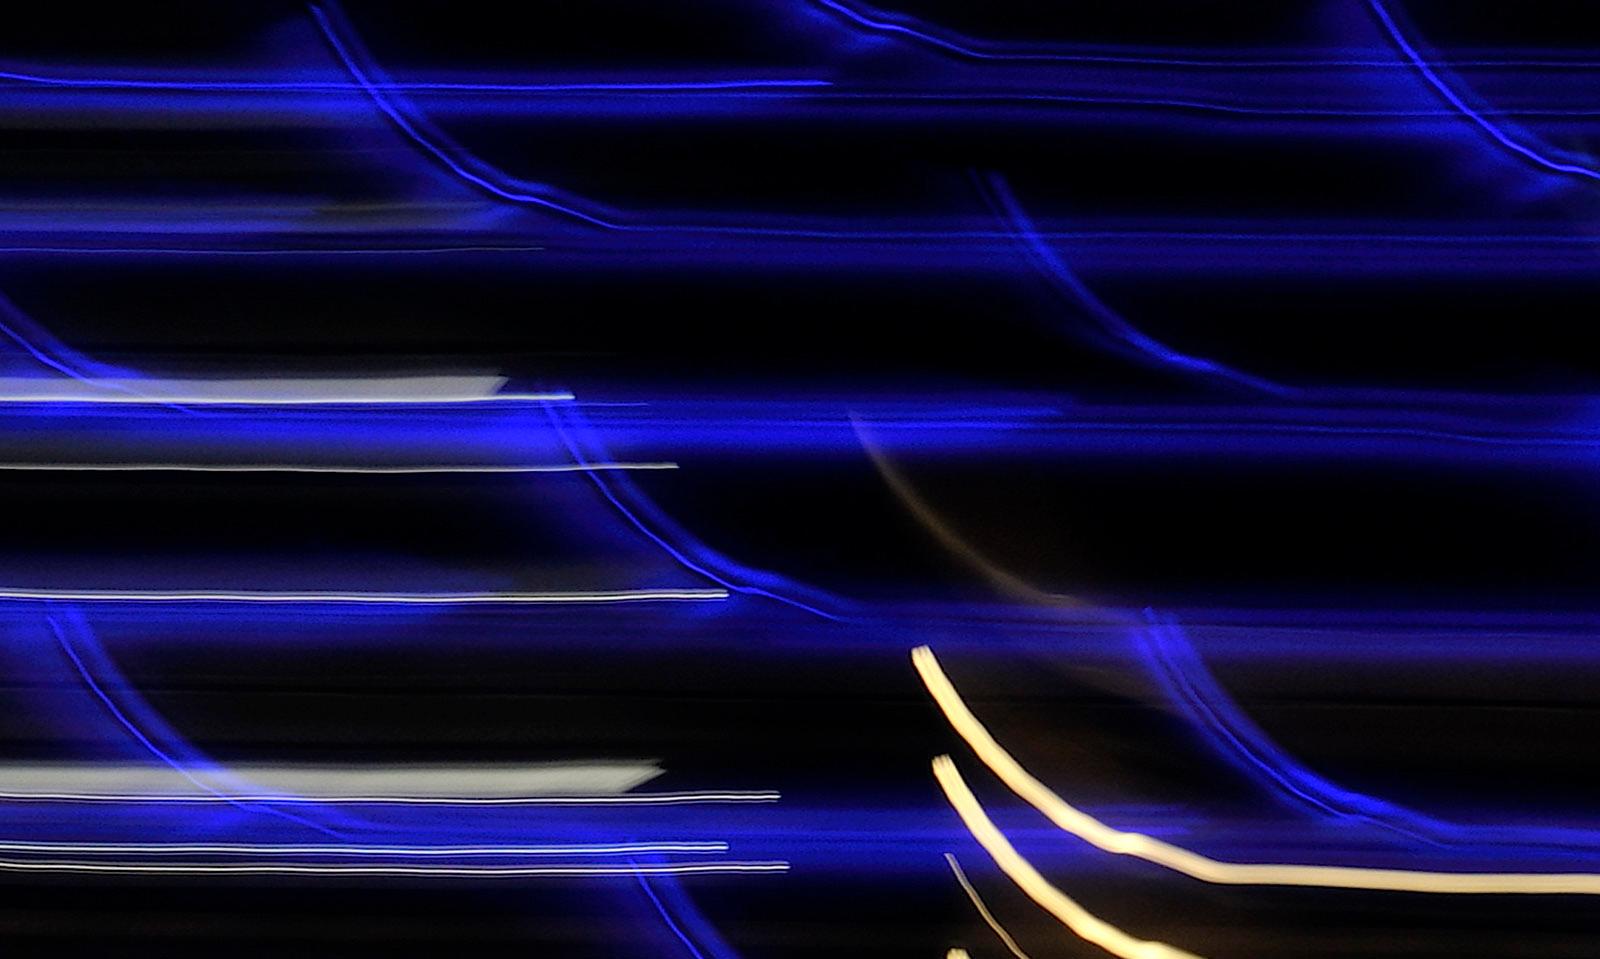 Blue 2 - Signed limited edition abstract pigment print, Large Format, Contemporary - Photograph by Michael Banks